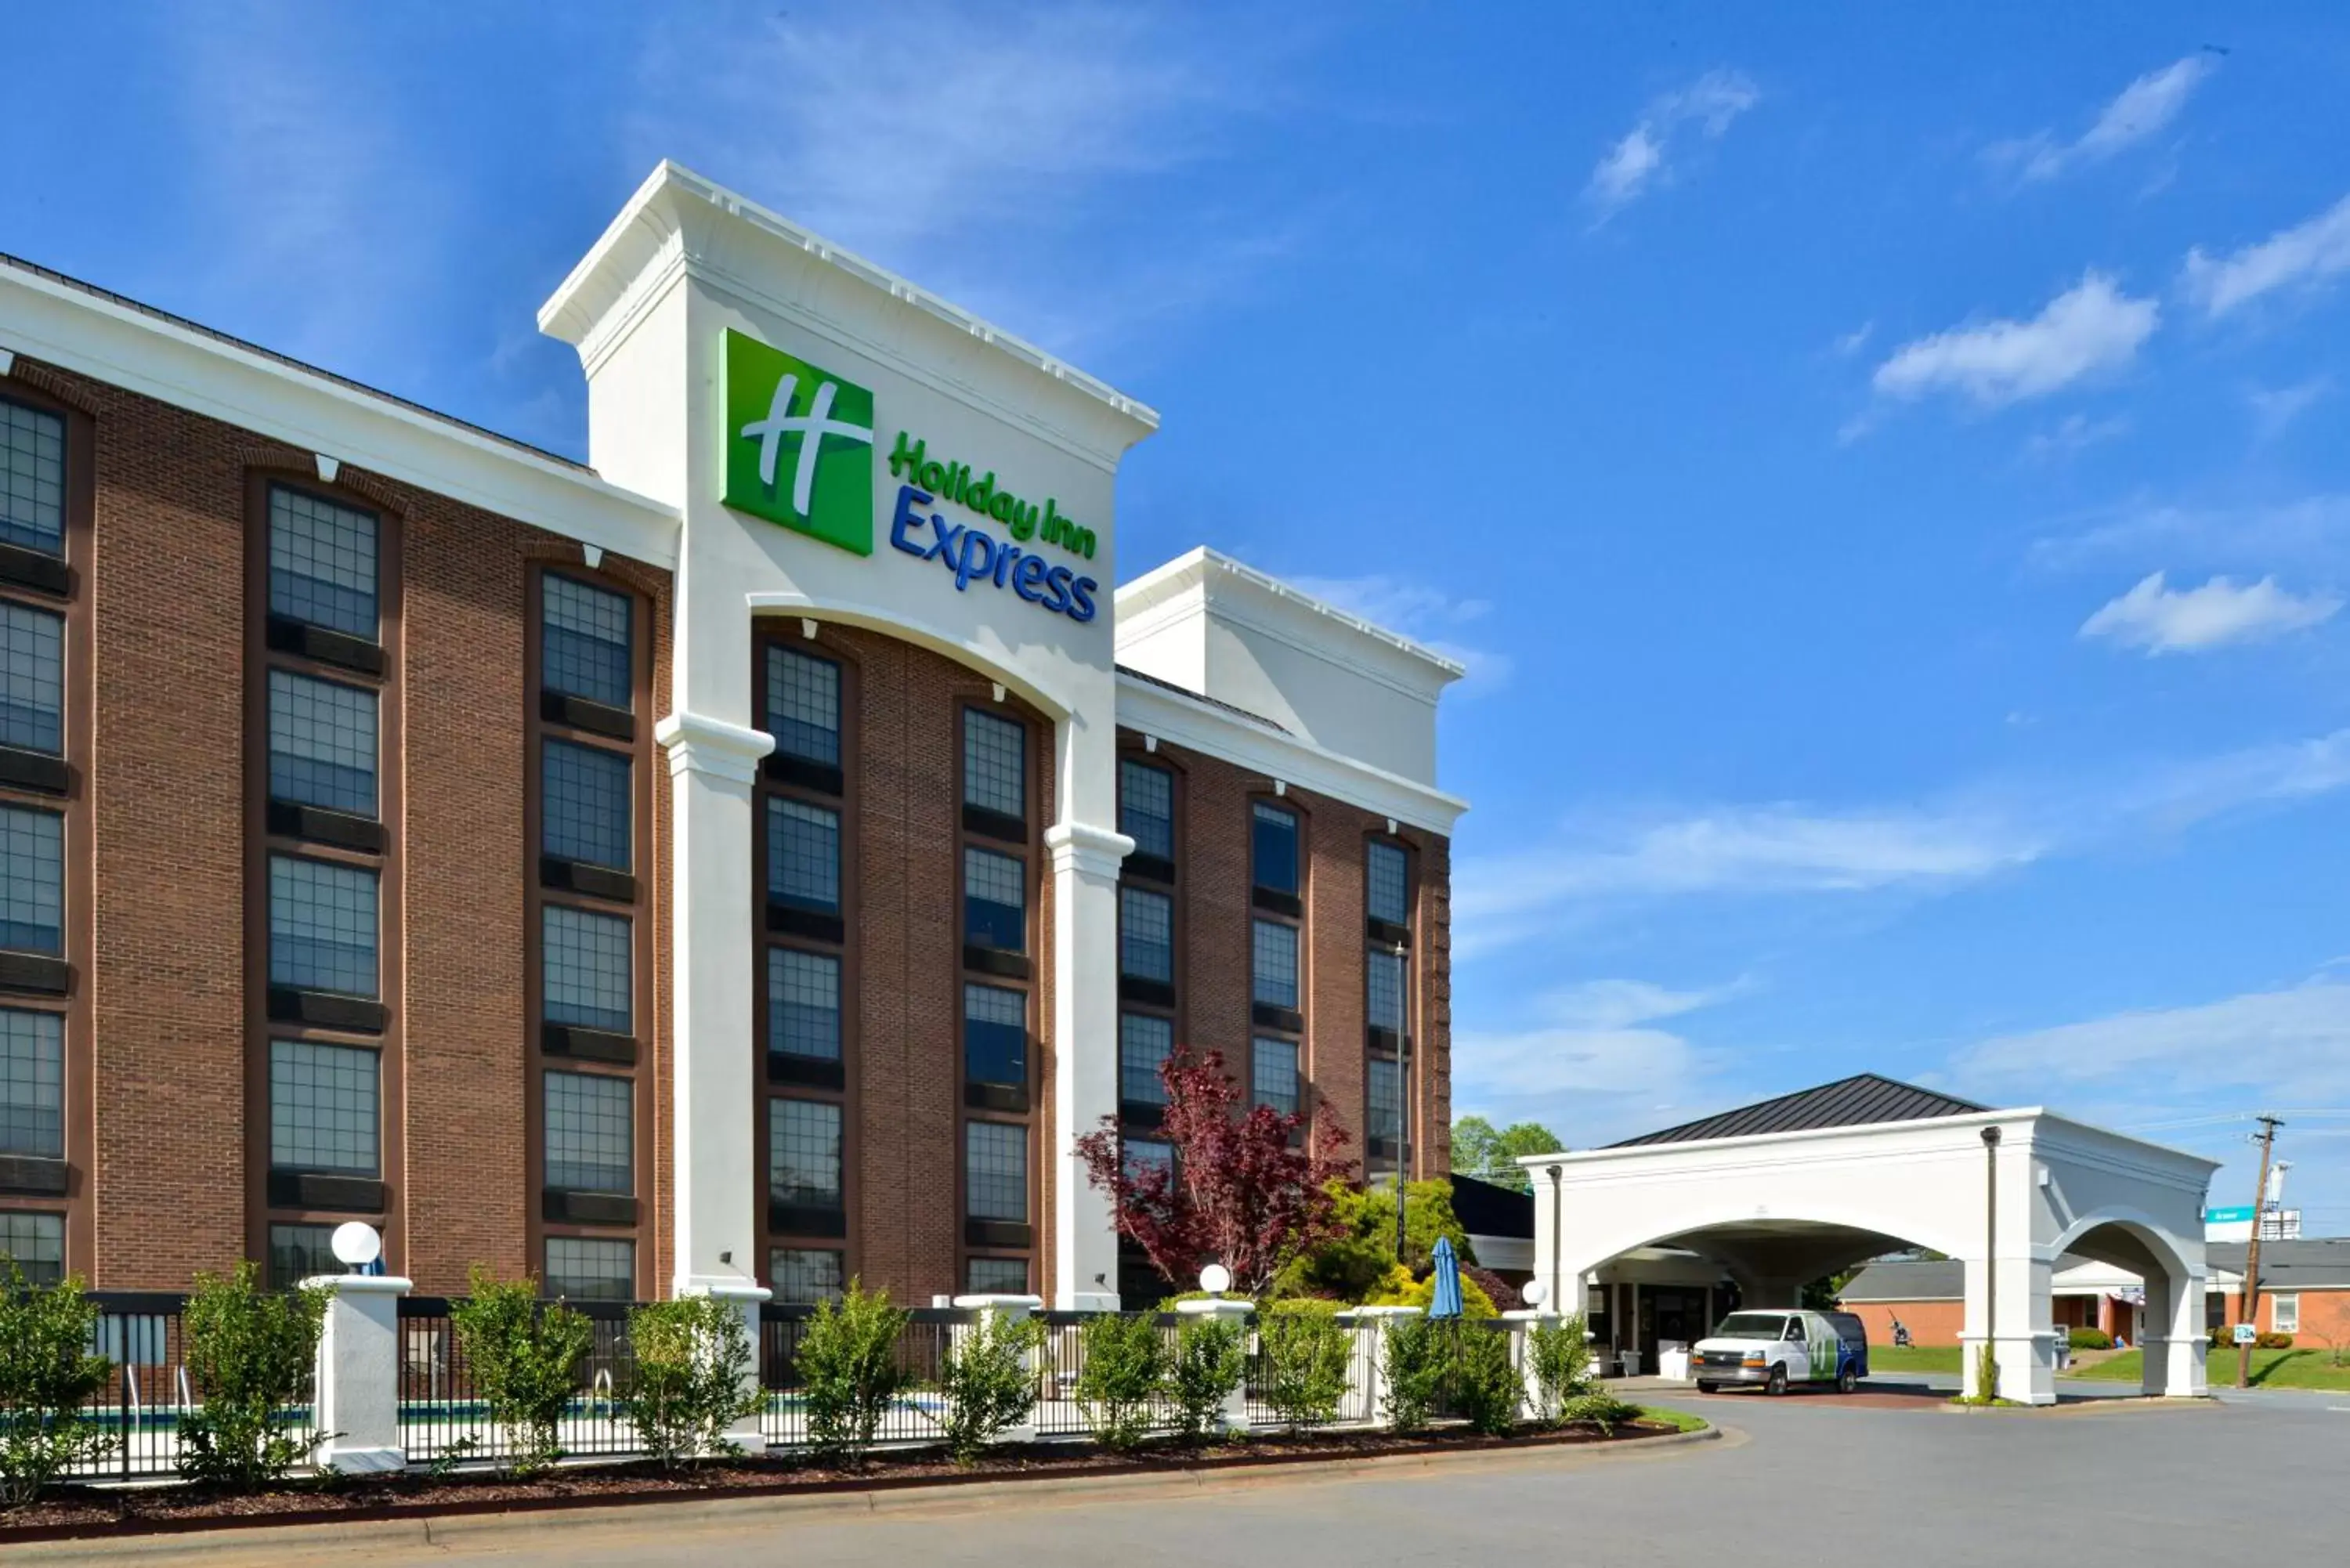 Property Building in Holiday Inn Express Winston-Salem Medical Ctr Area